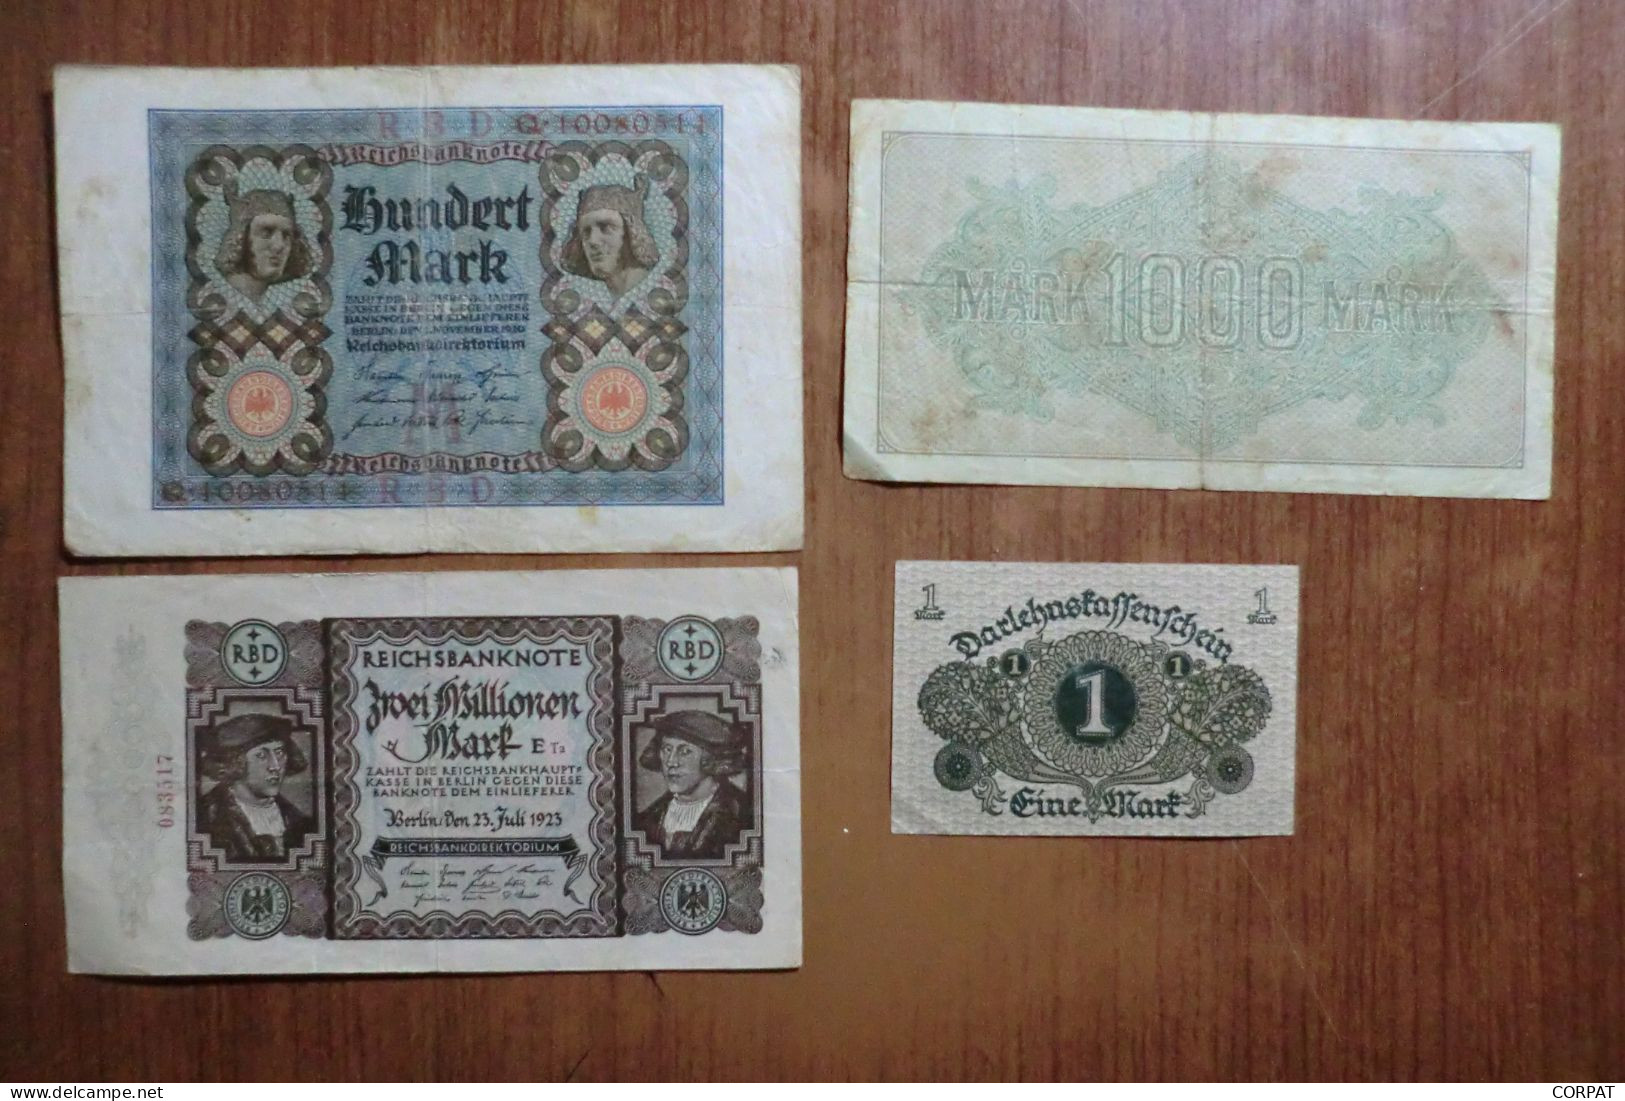 Germany lot of old banknotes like the photos shown (8 photos)